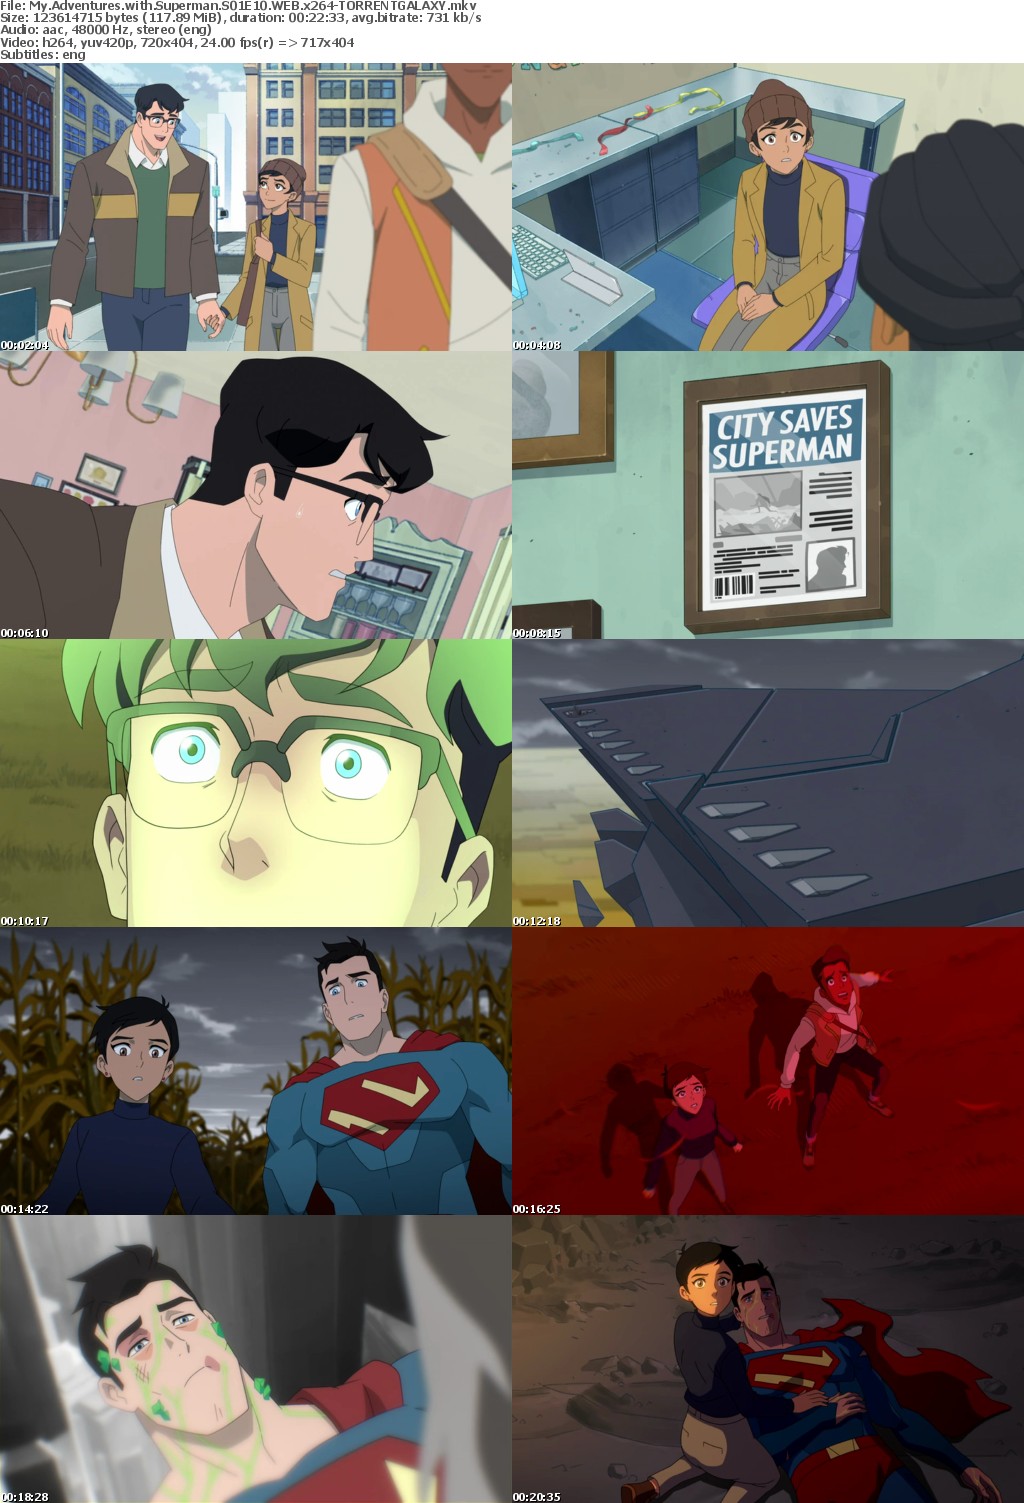 My Adventures with Superman S01E10 WEB x264-GALAXY